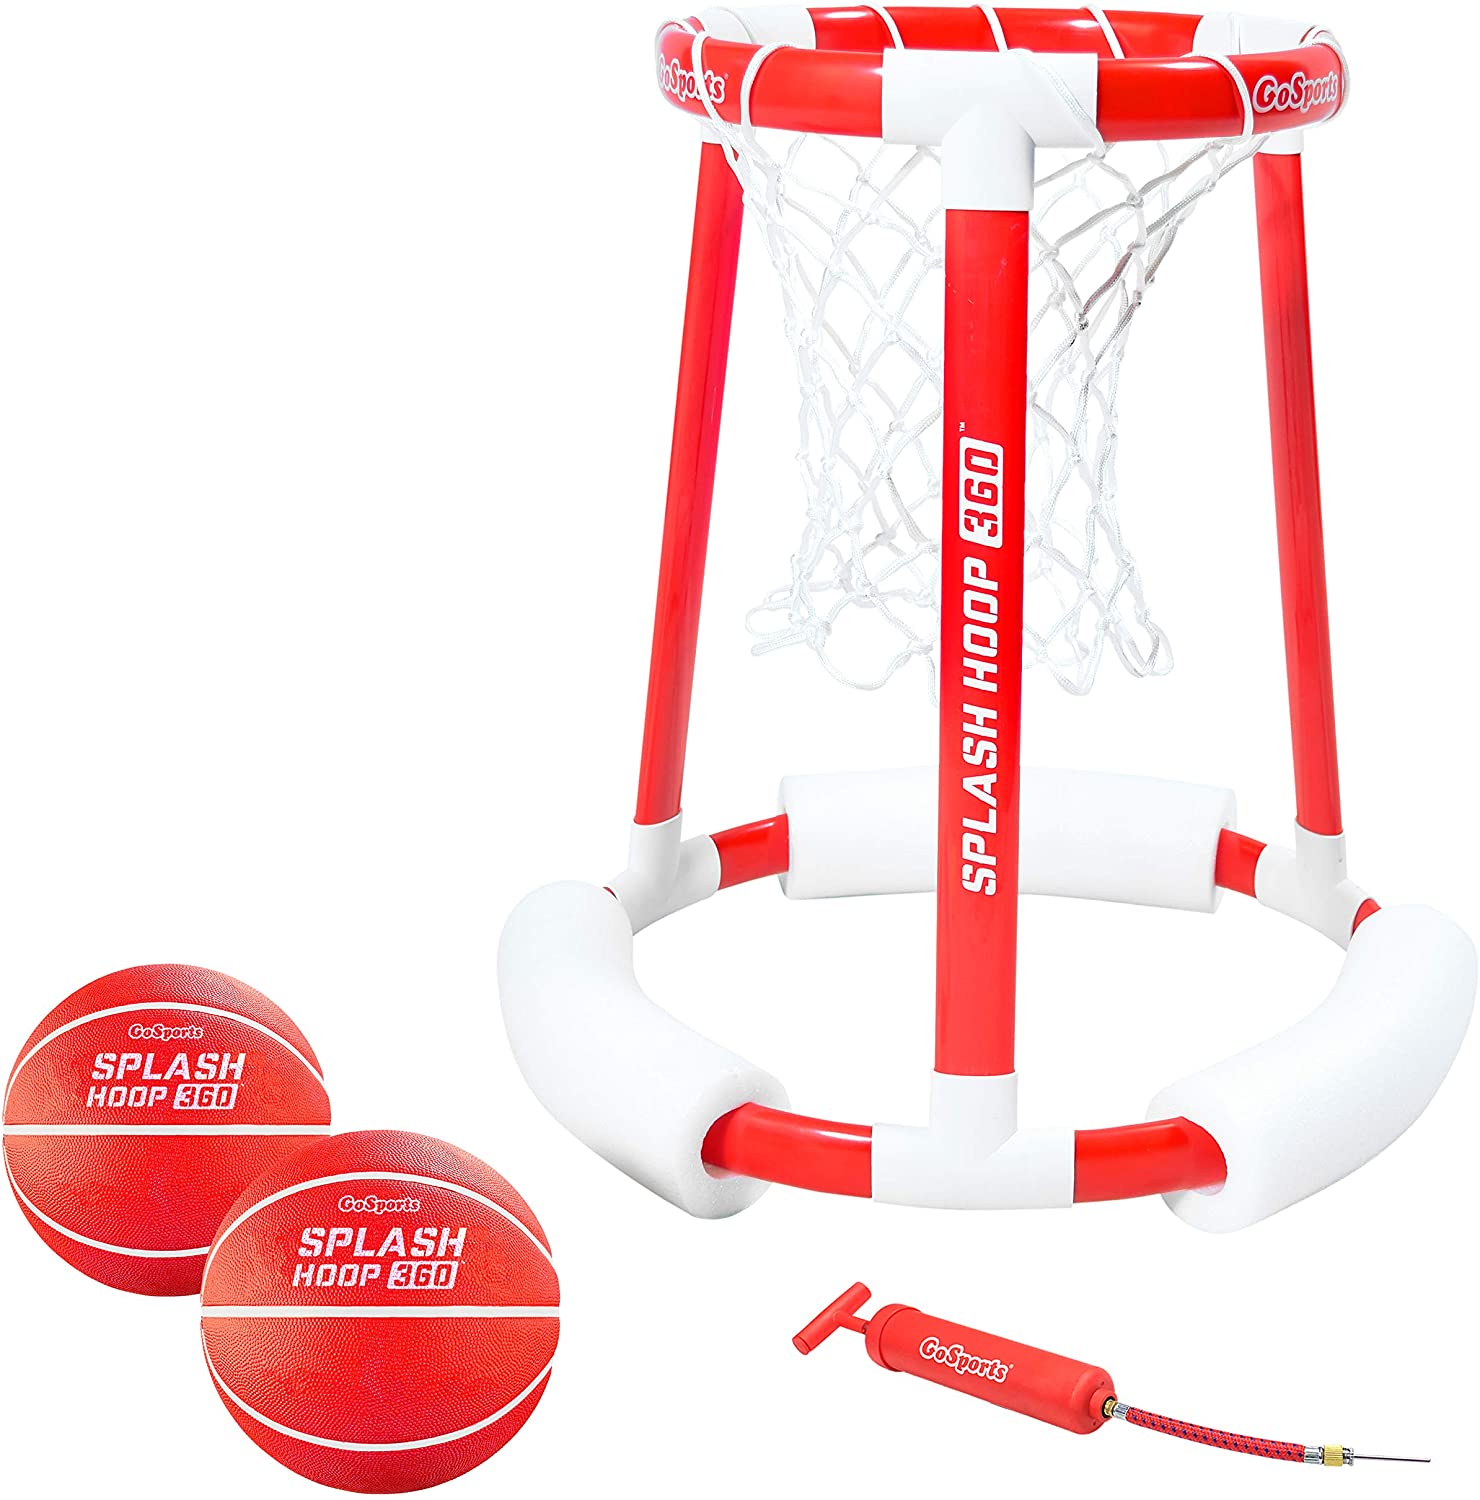 GoSports Party Pool Game Basketball Hoop